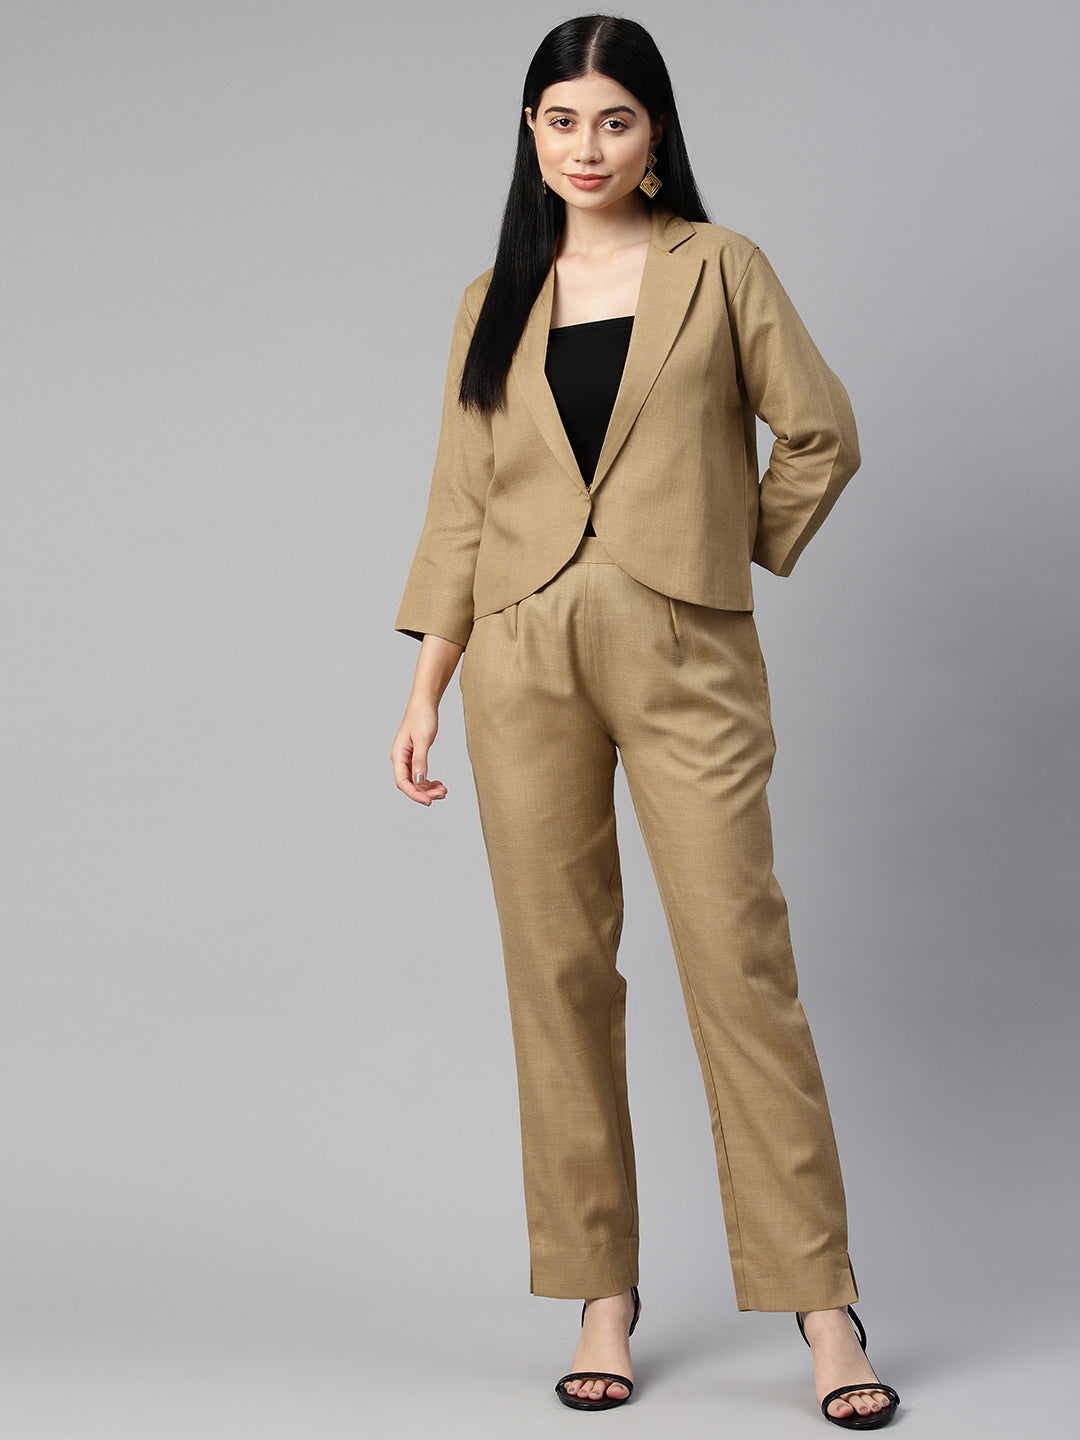 Work Wear Trend to Try: A Blazer Dress Over Pants